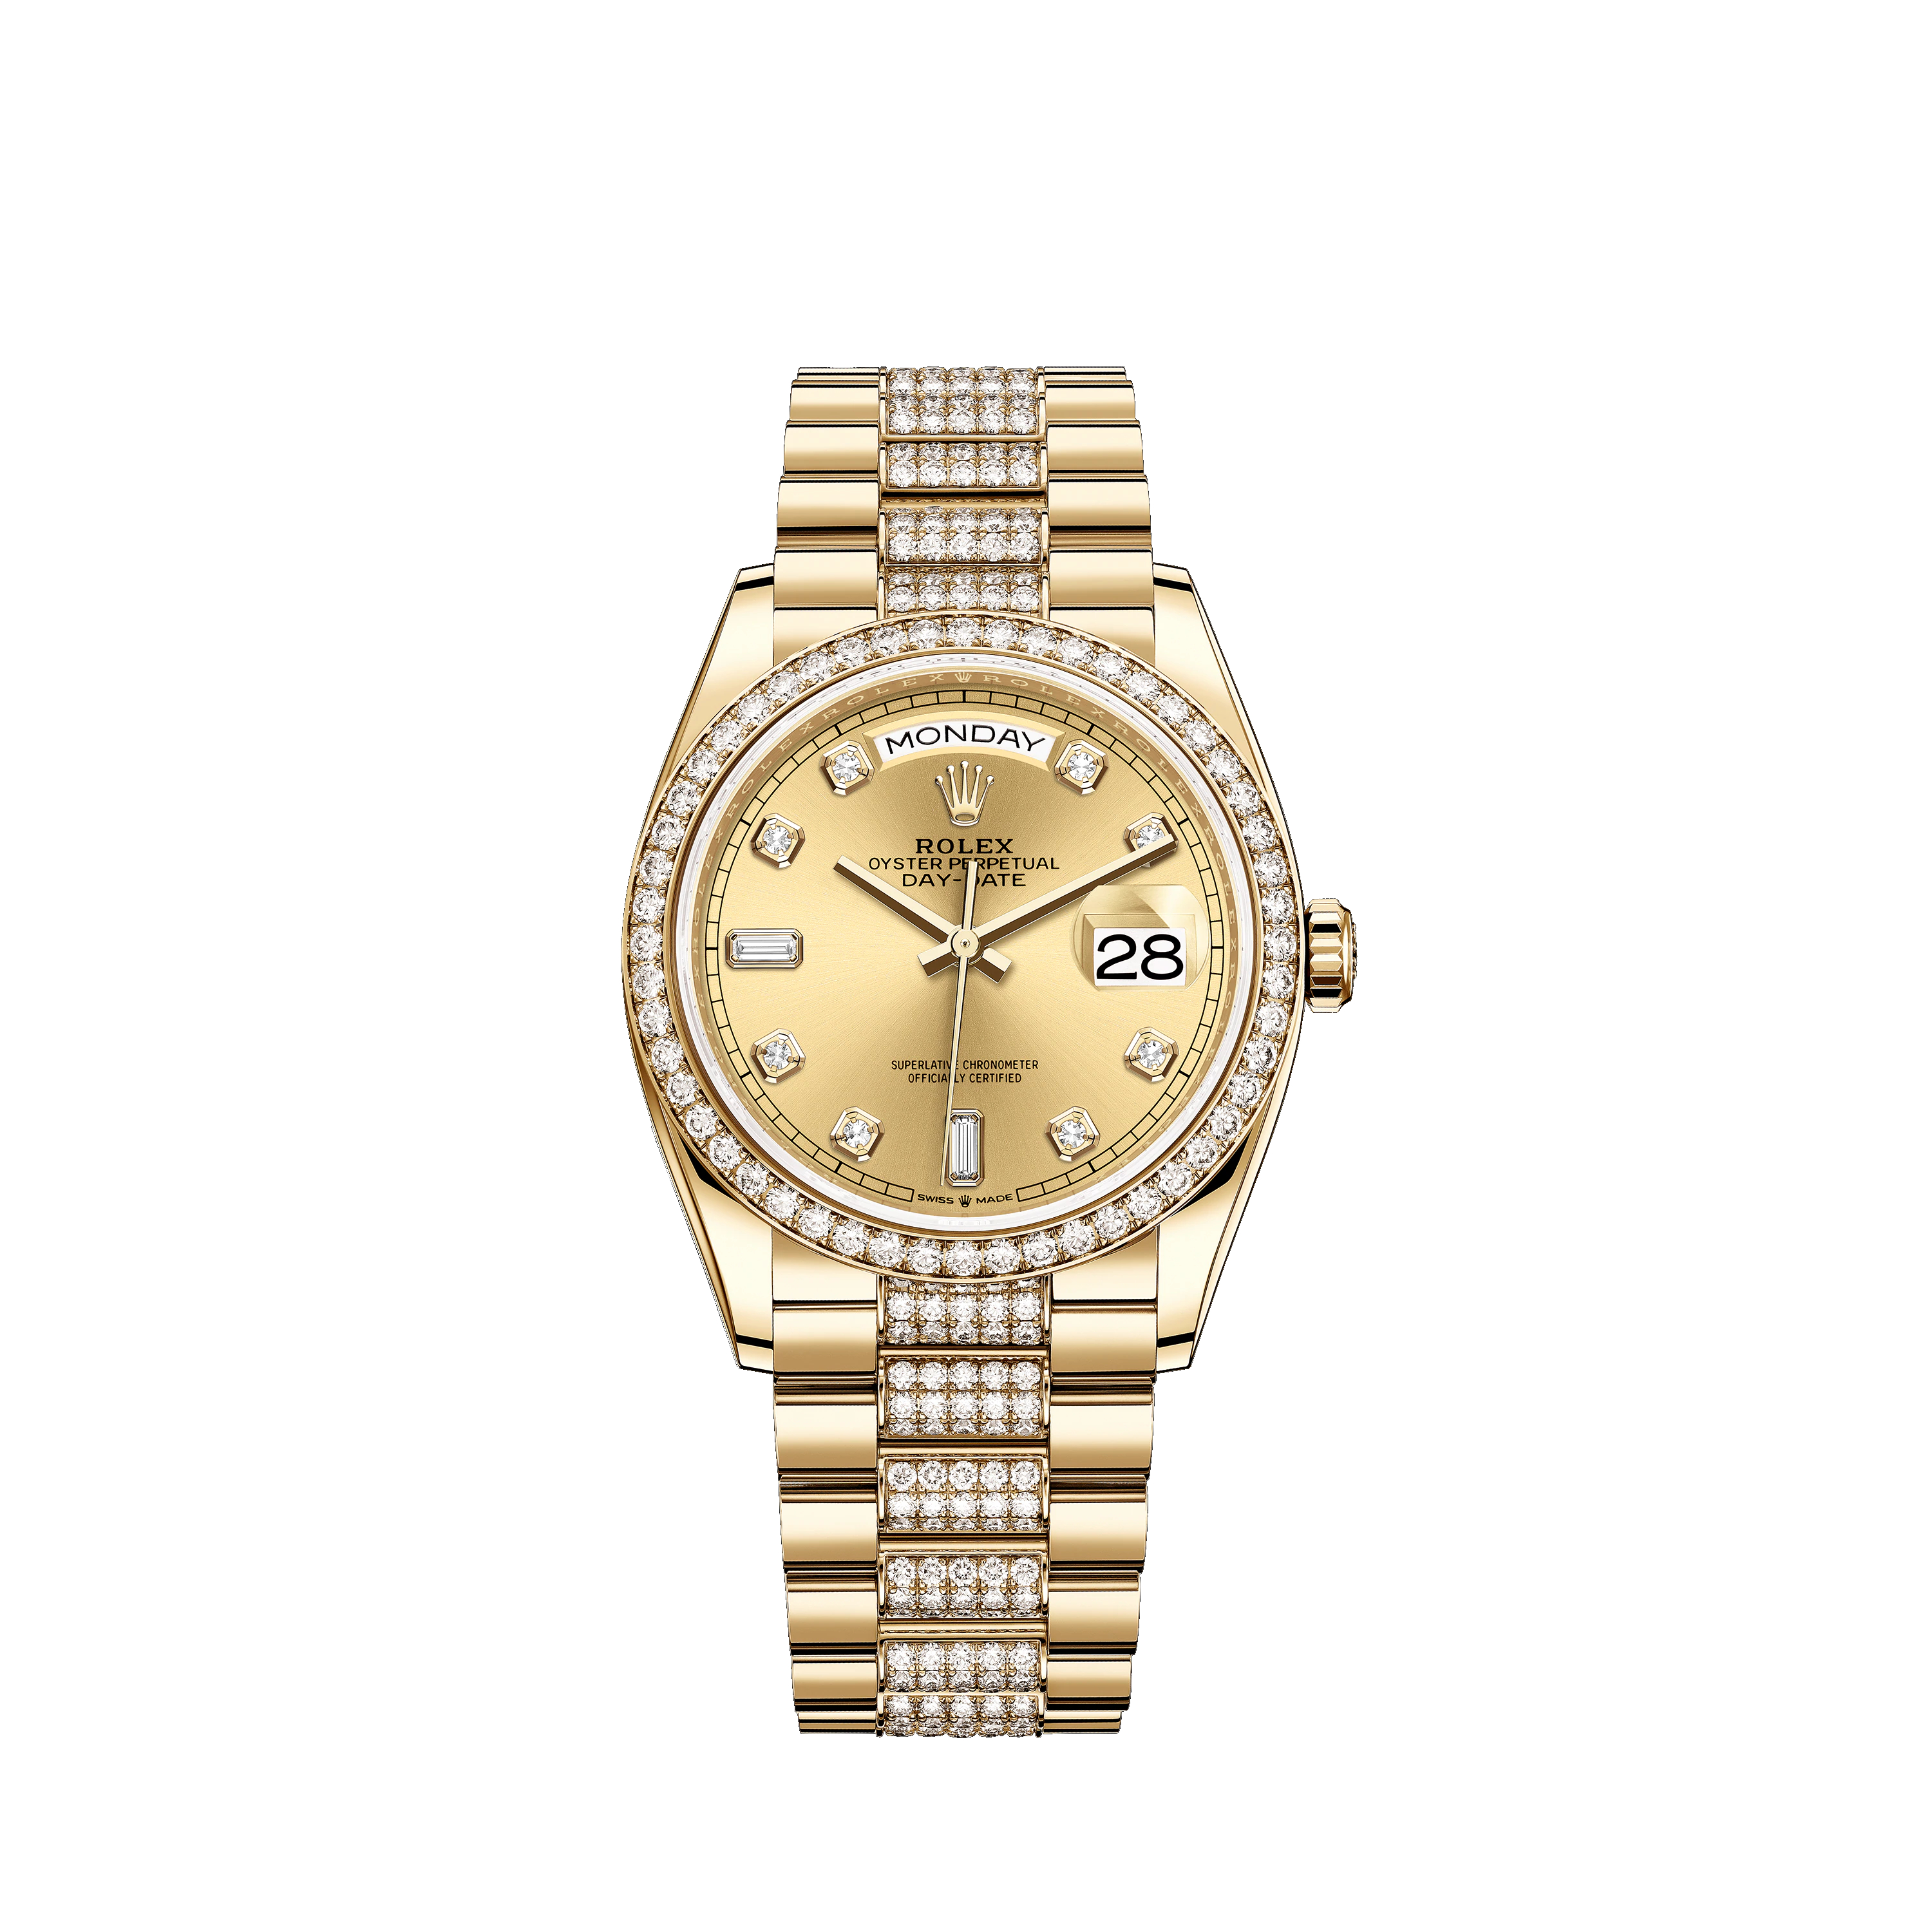 Day-Date 36 128348RBR Gold & Diamonds Watch (Champagne-Colour Set with Diamonds)